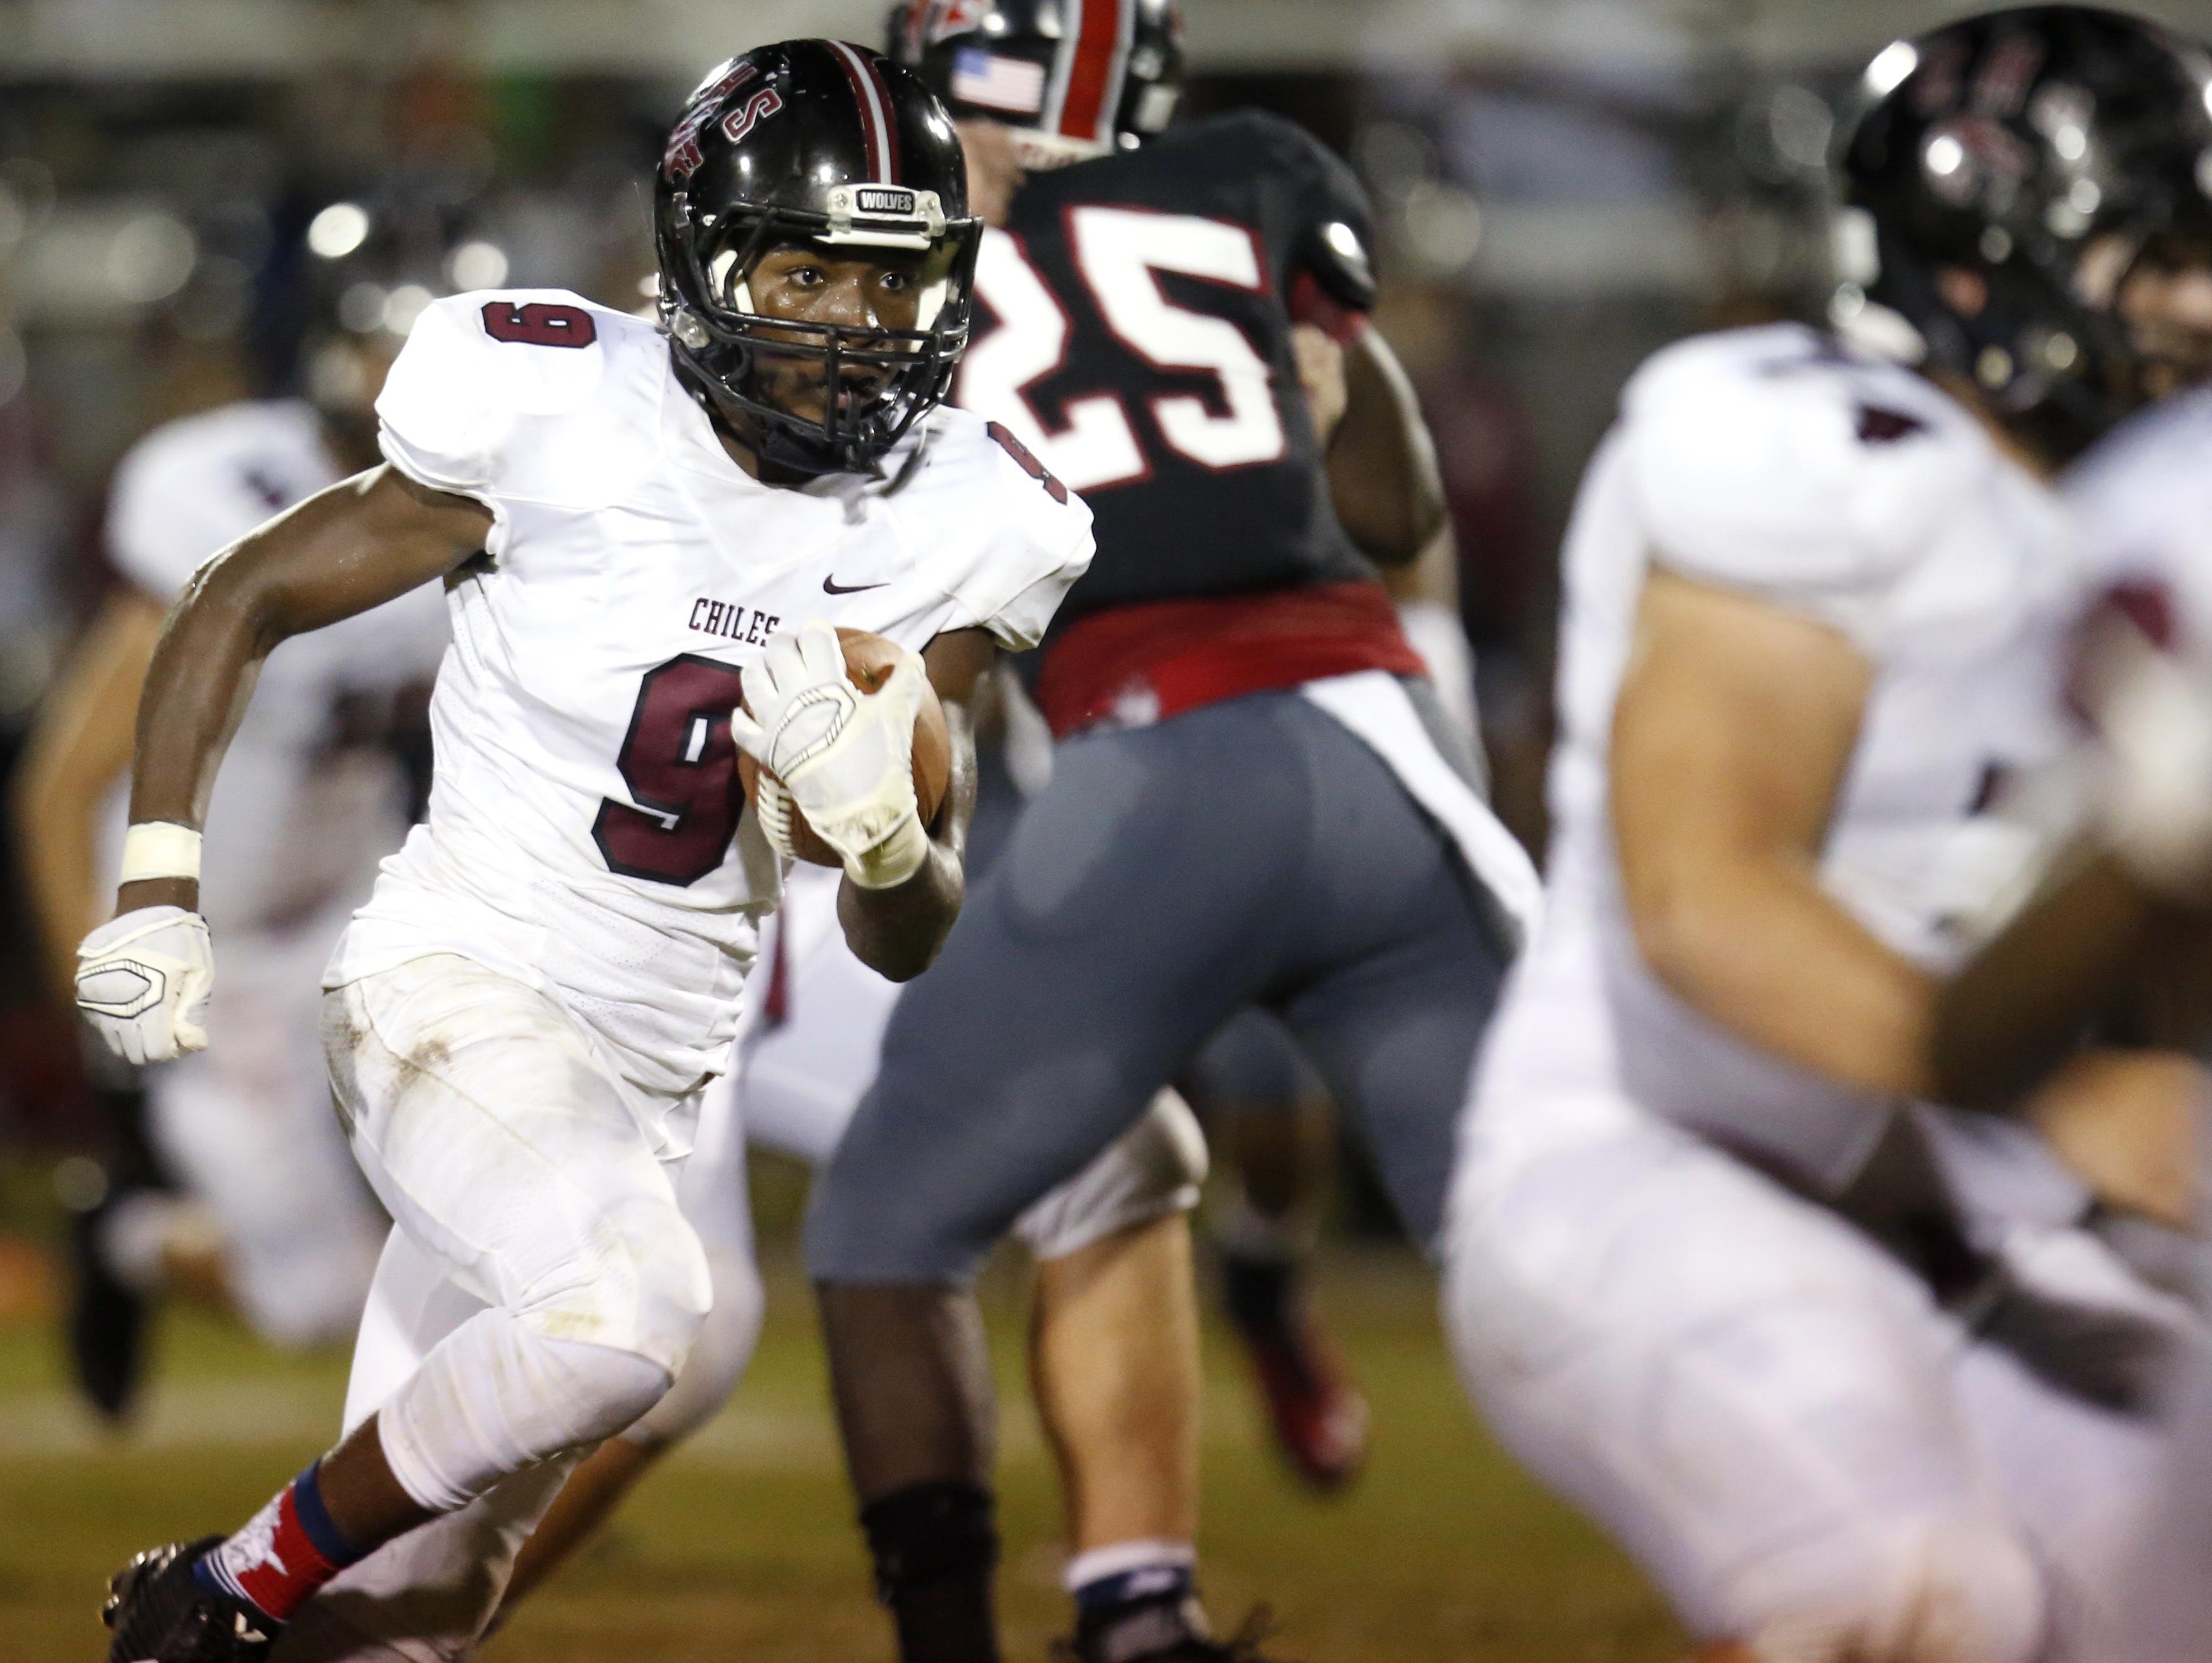 Chiles' Shane Sanders runs the ball against NFC during their game at North Florida Christian on Friday.